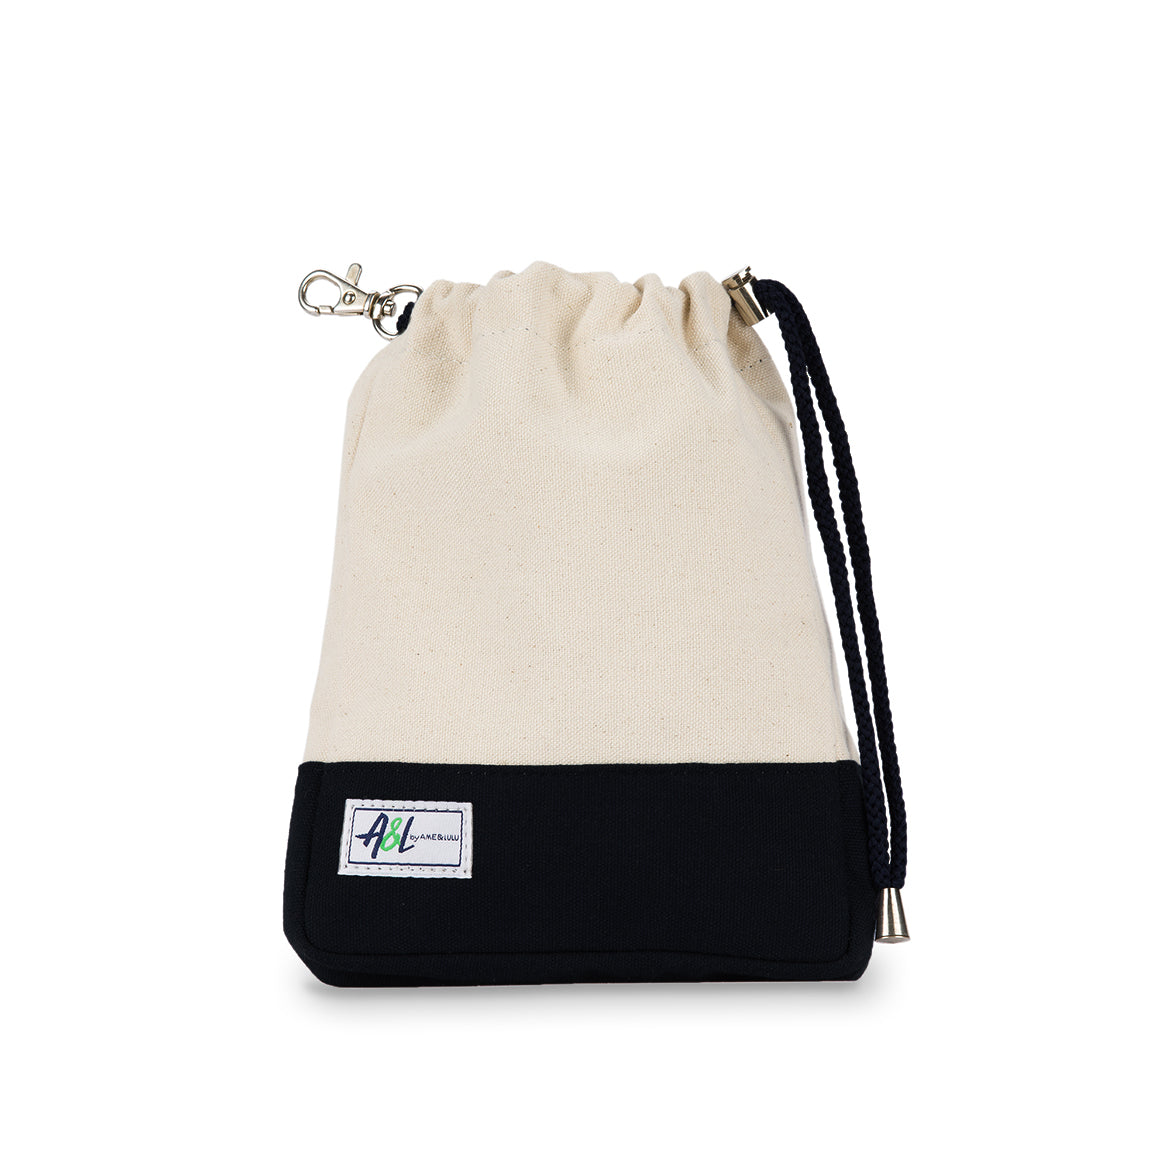 tan canvas small drawstring pouch with black trim.